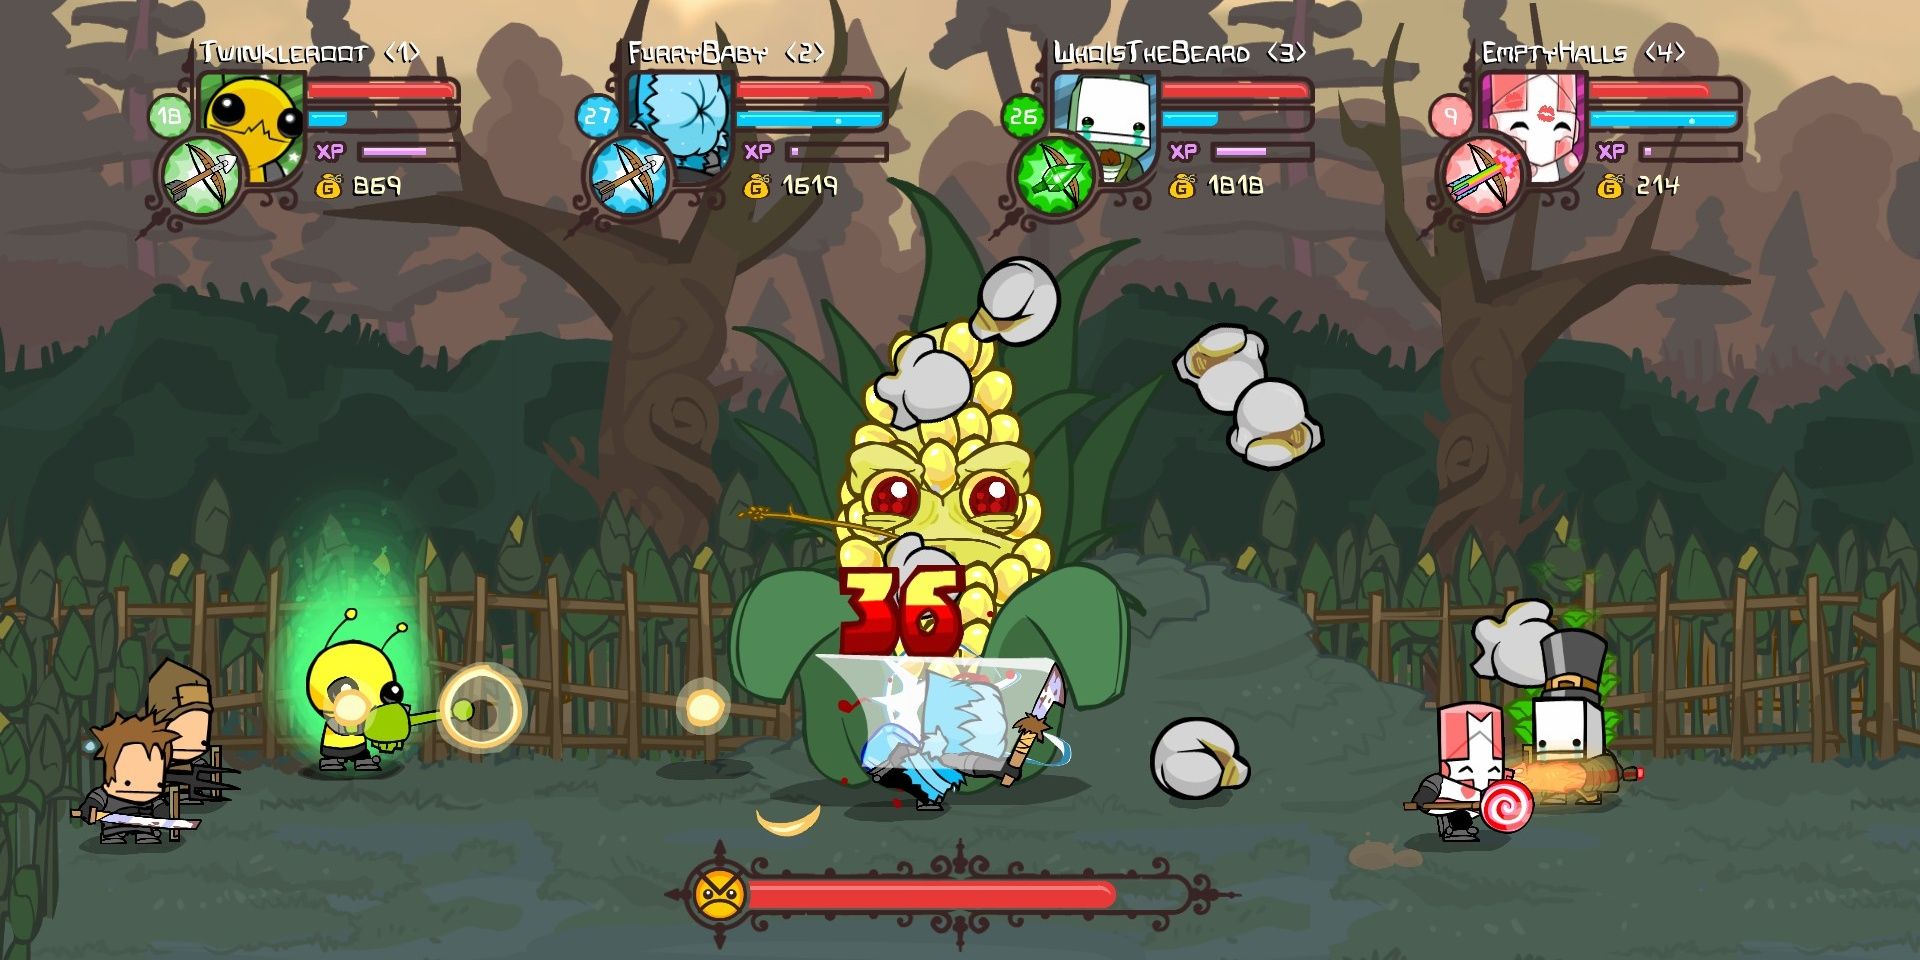 Knights beating up a corn cob in Castle Crashers